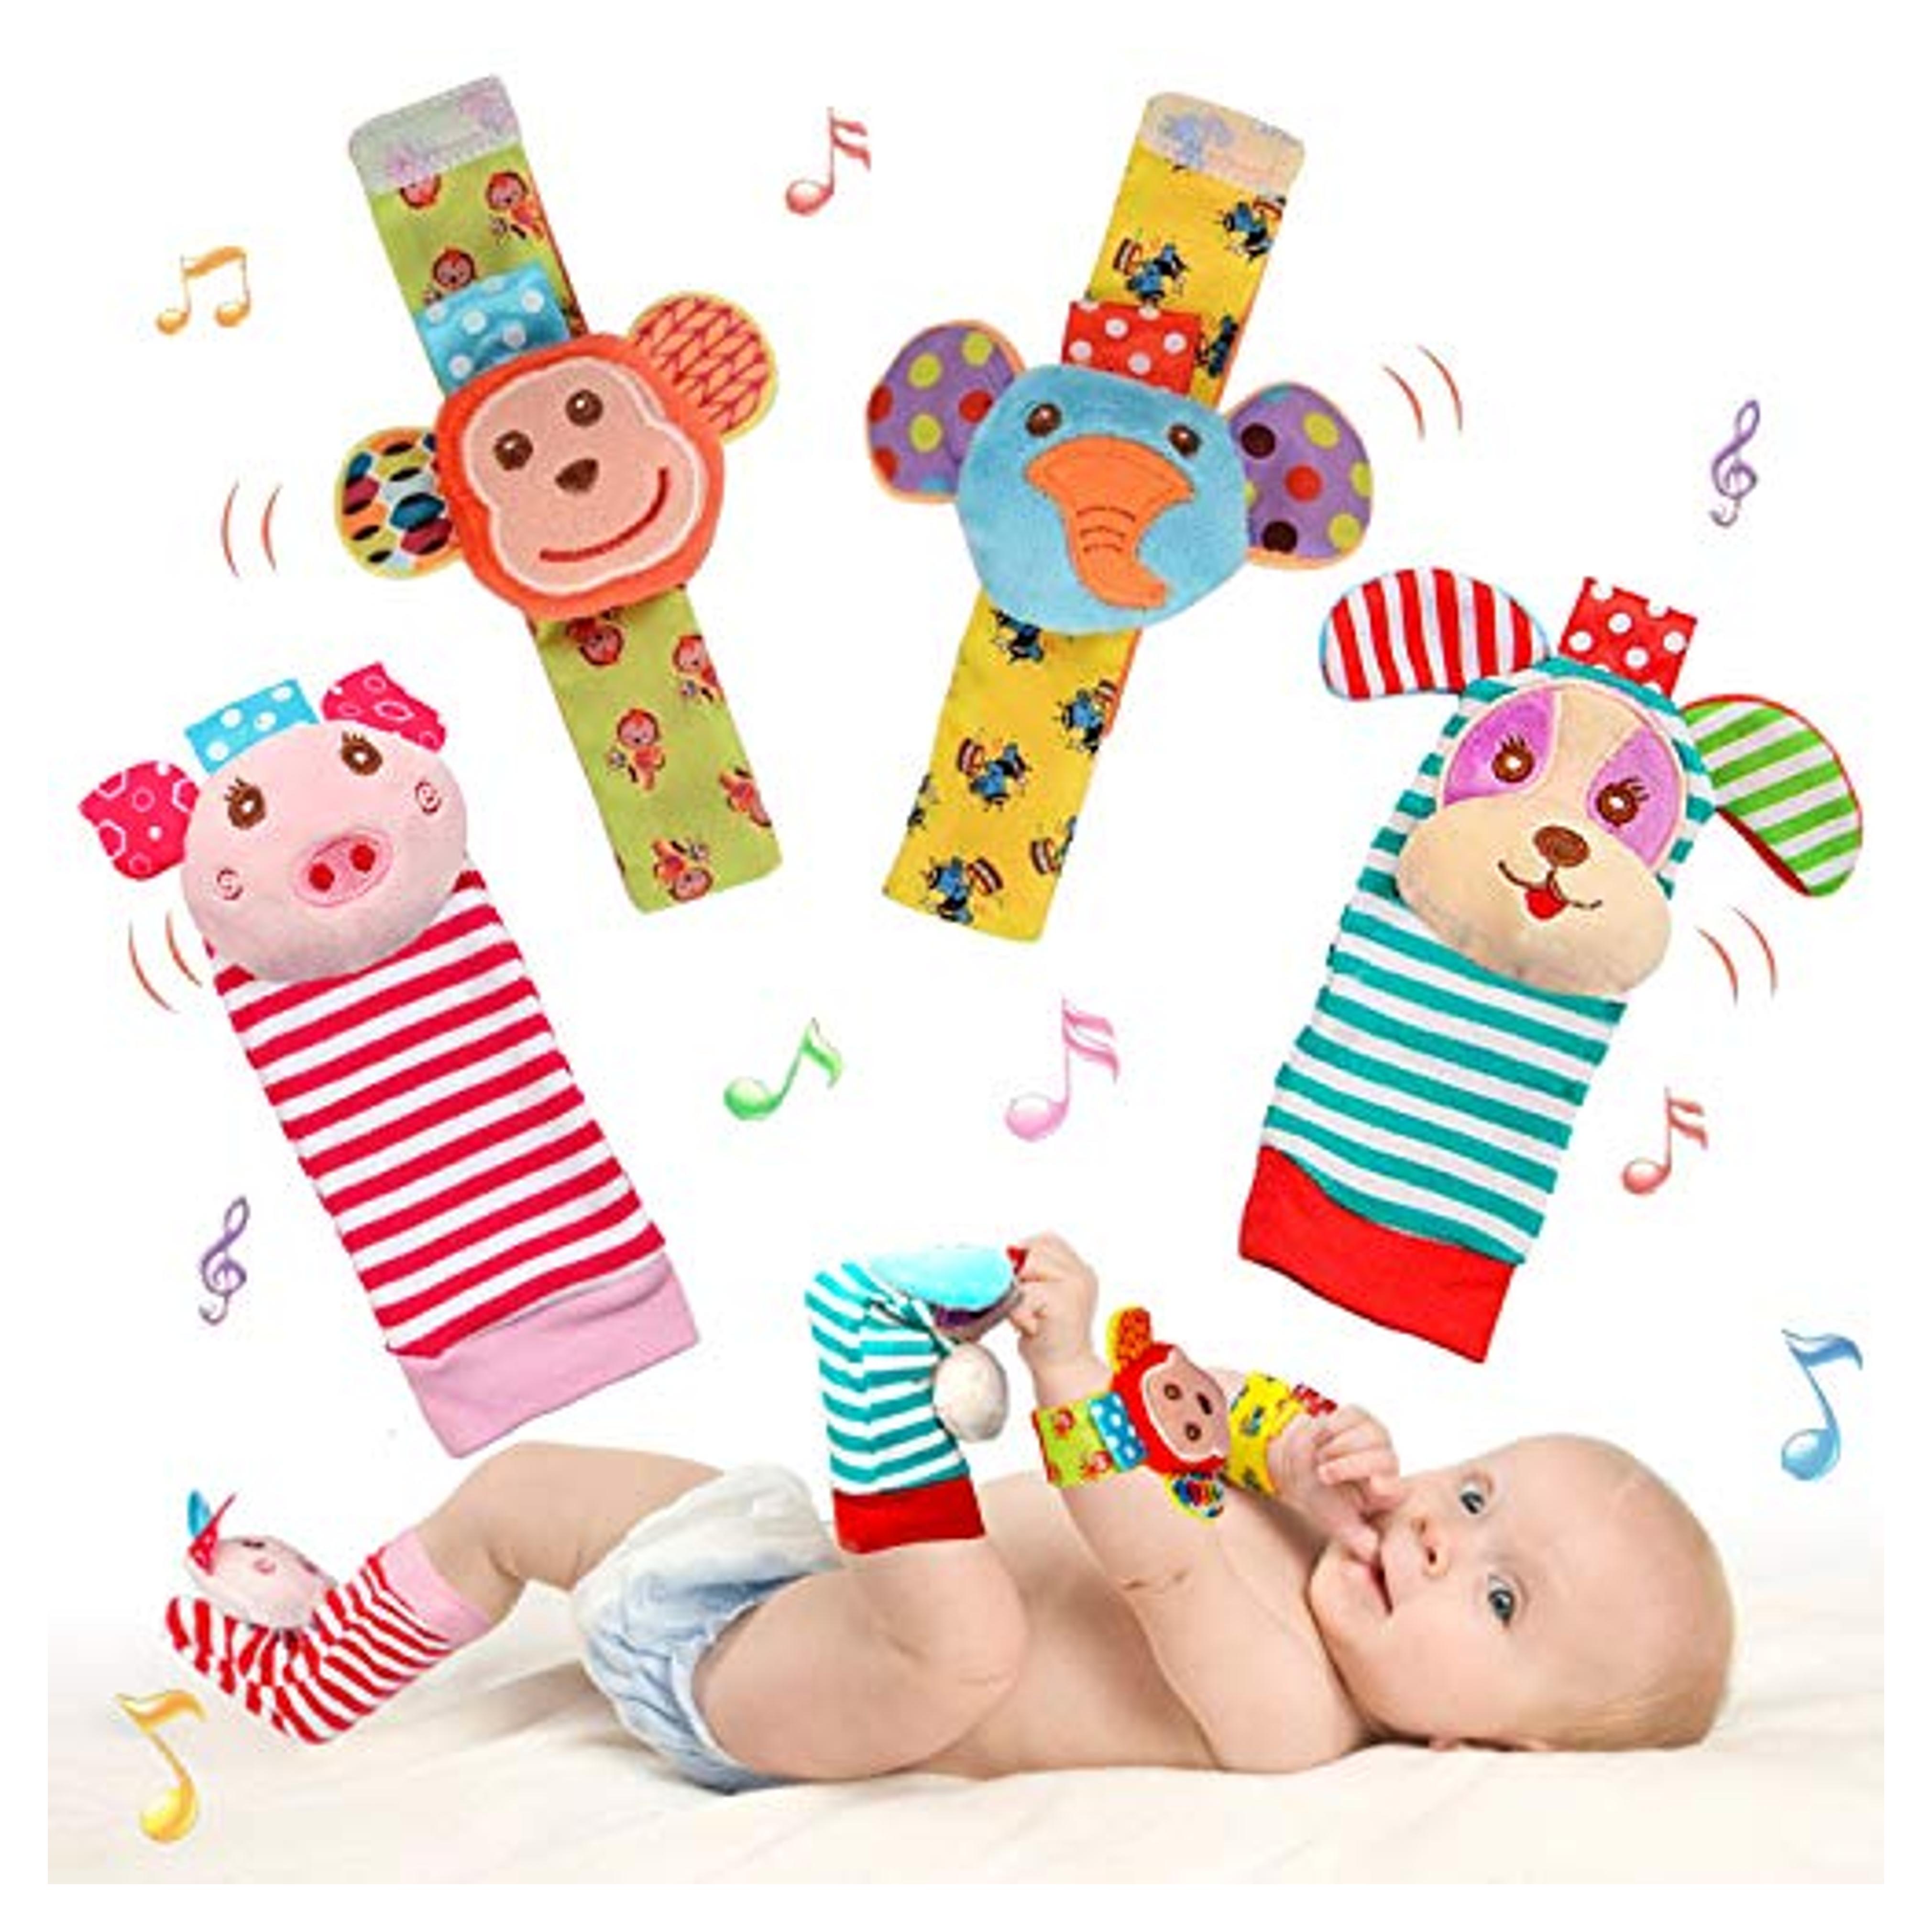 Amazon.com: SSK Soft Baby Wrist Rattle Foot Finder Socks Set,Cotton and Plush Stuffed Infant Toys,Birthday Holiday Birth Present for Newborn Boy Girl 0/3/4/6/7/8/9/12/18 Months Kids Toddler,4 Cute Animals : Toys & Games